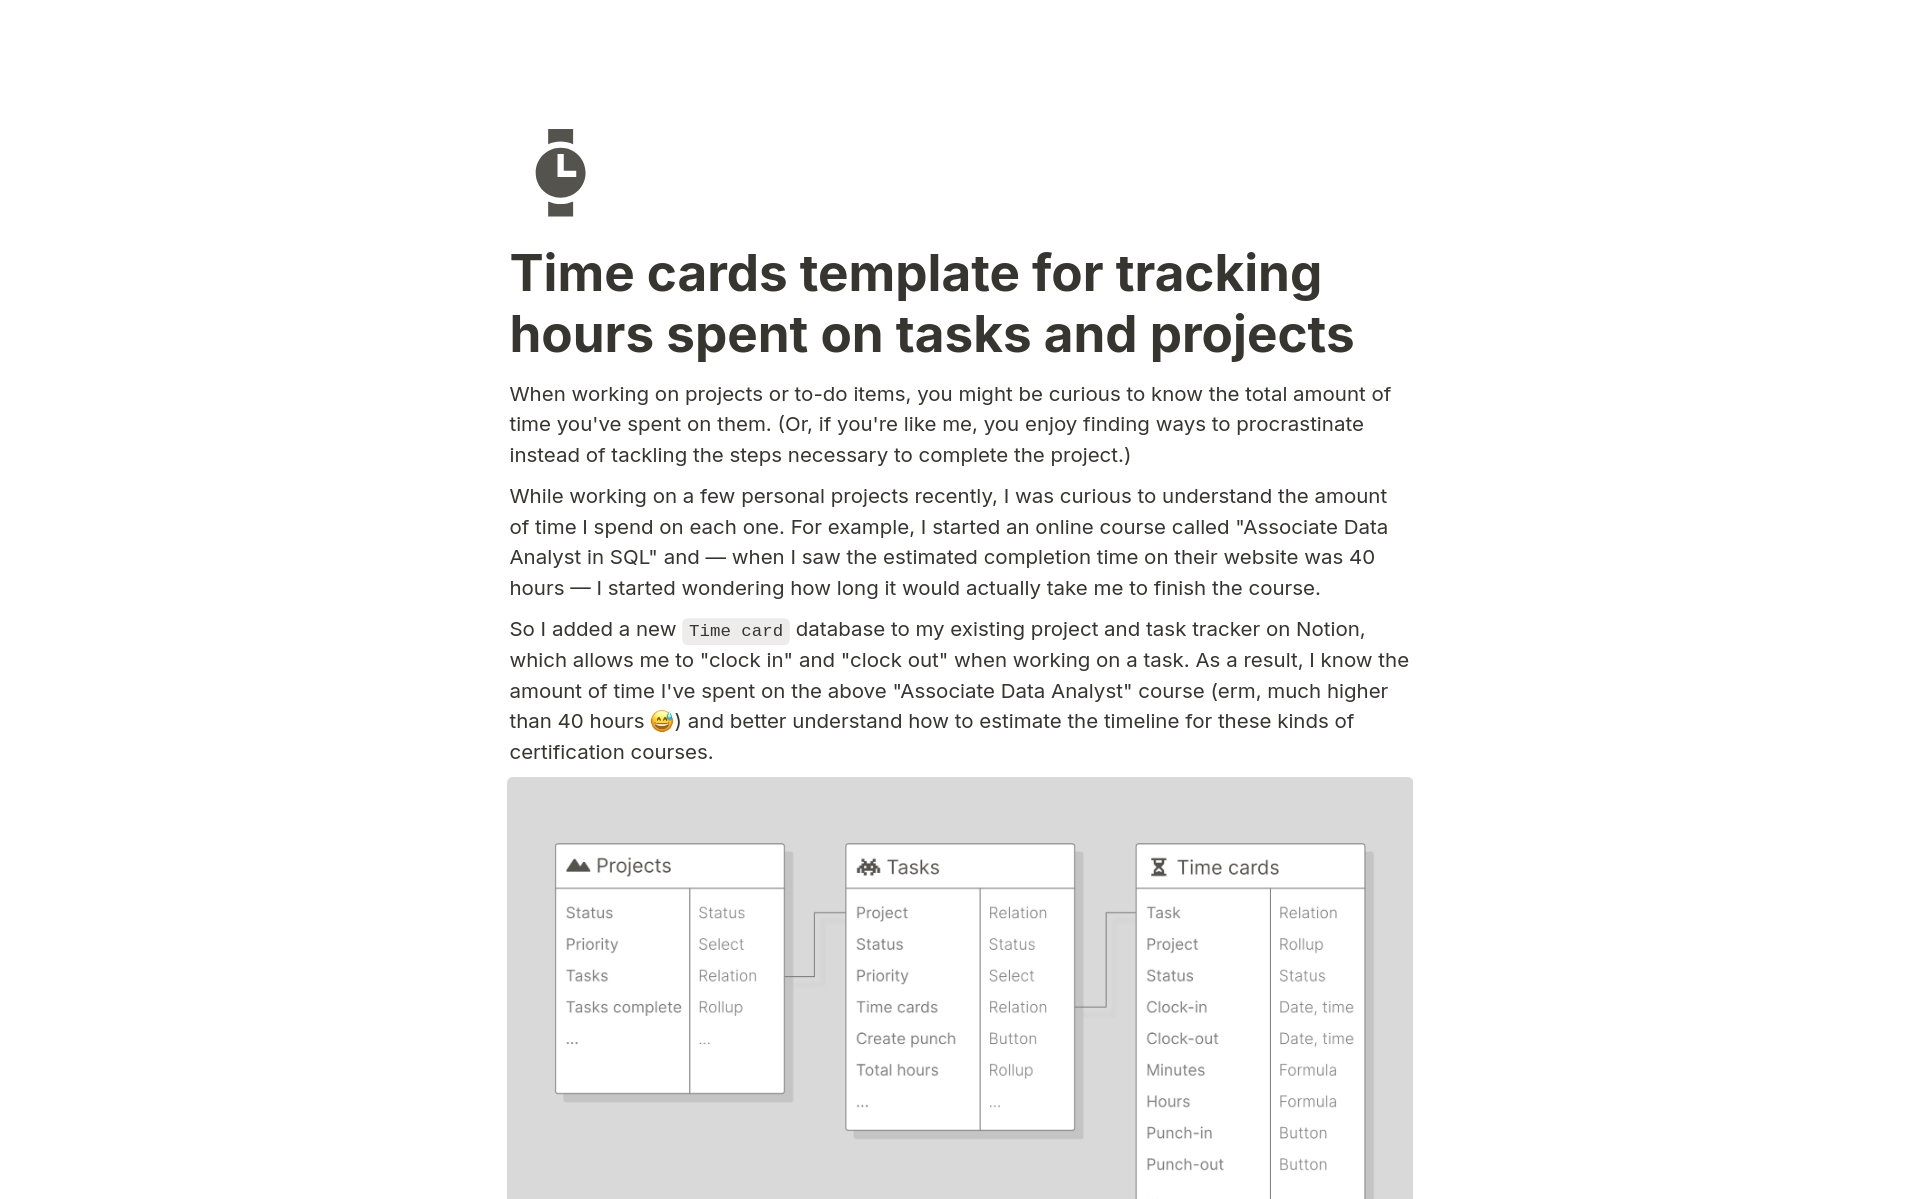 Vista previa de plantilla para Time cards for tracking hours spent on projects